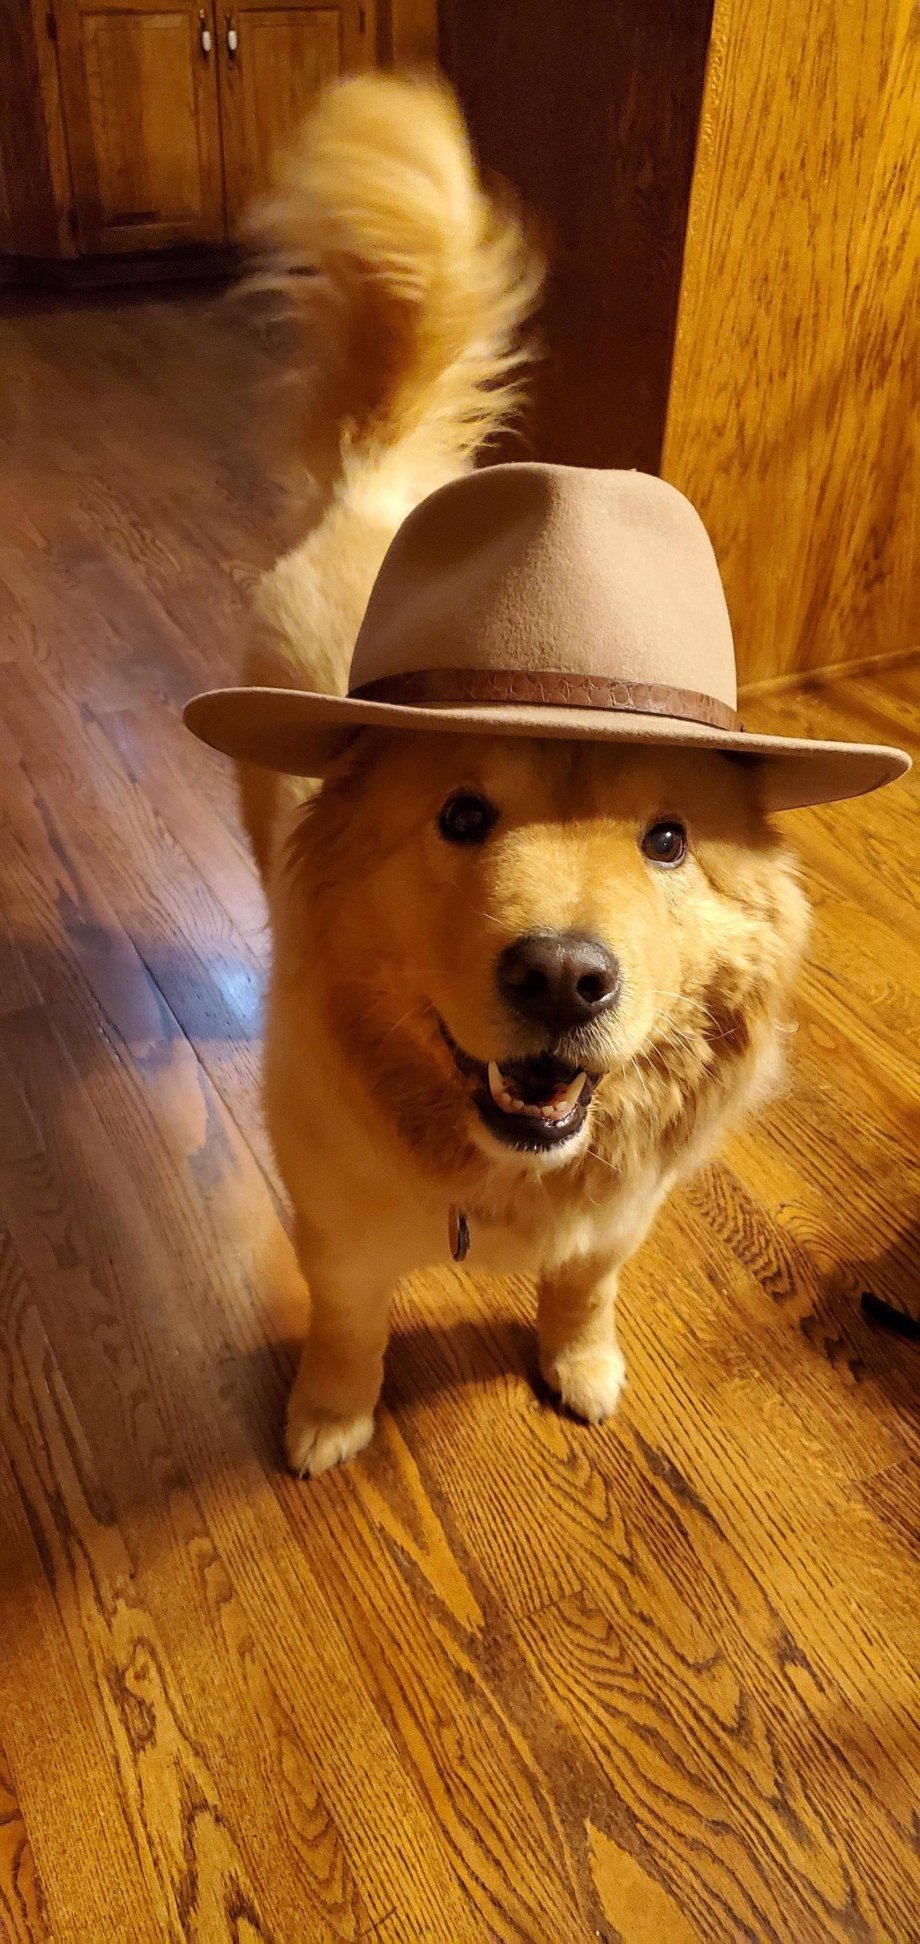 dog wearing a hat